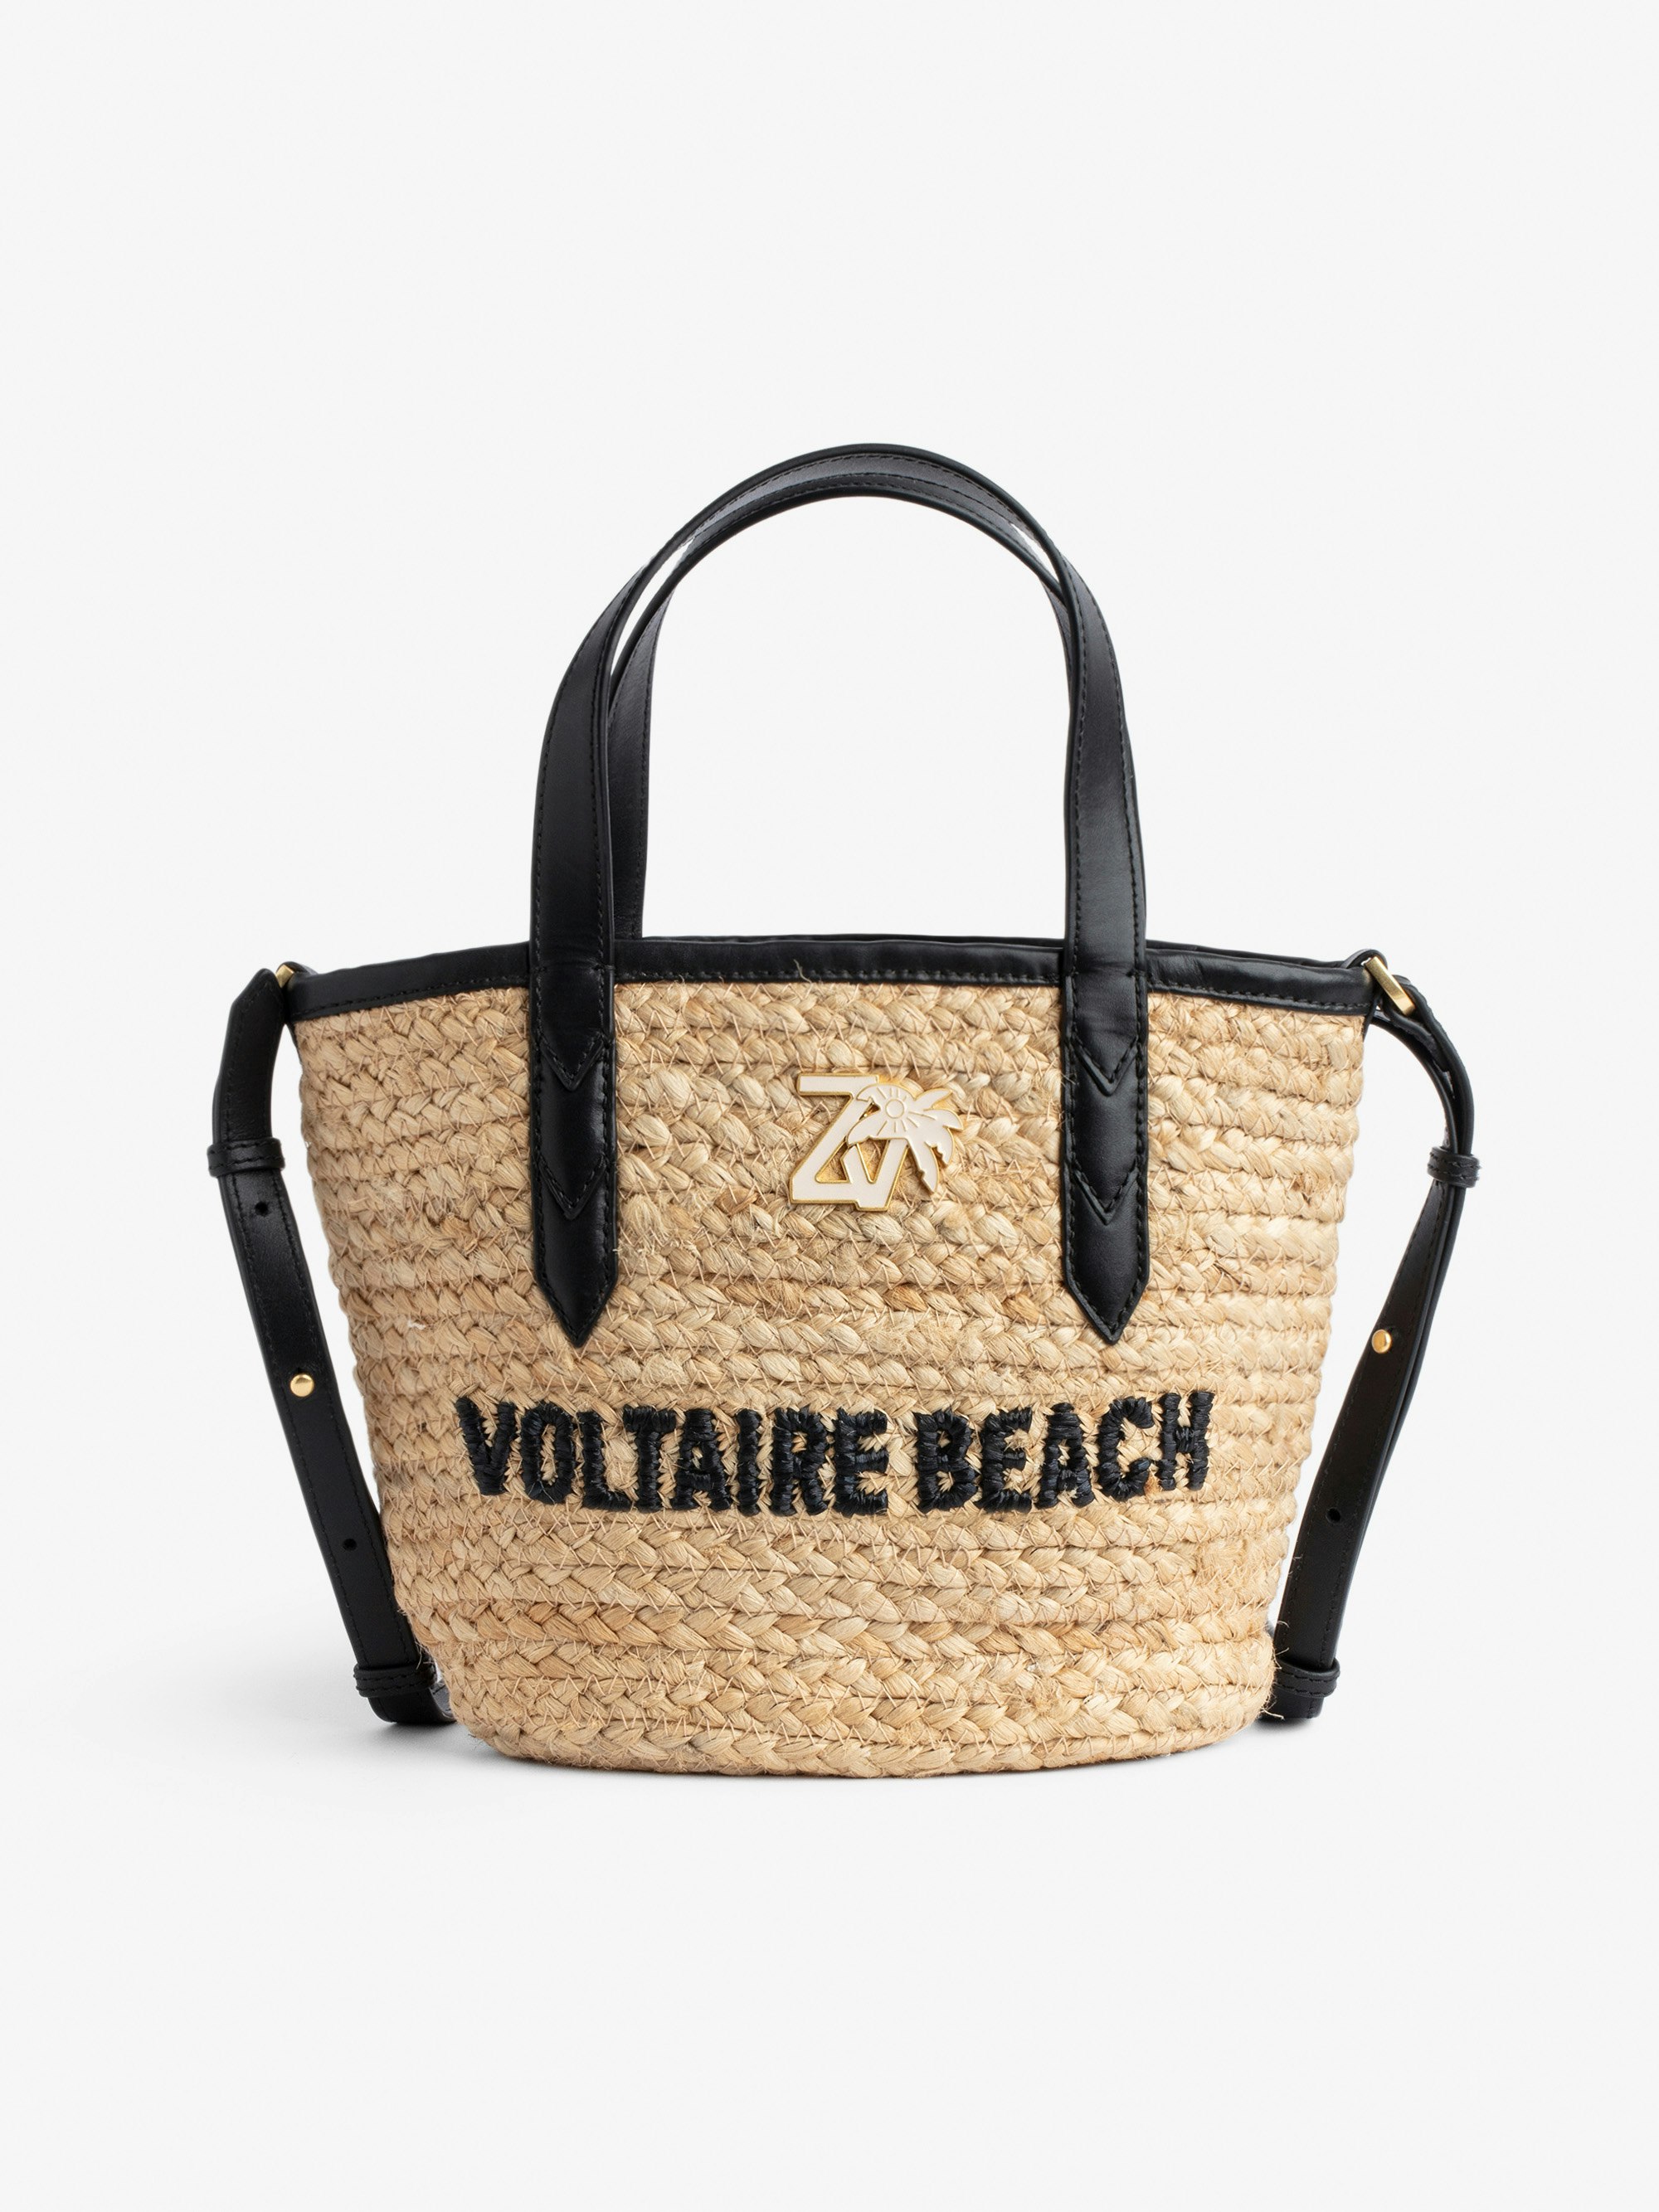 Le Baby Beach Bag - Women's straw bag with black leather shoulder strap, "Voltaire Beach" embroidery and ZV charm